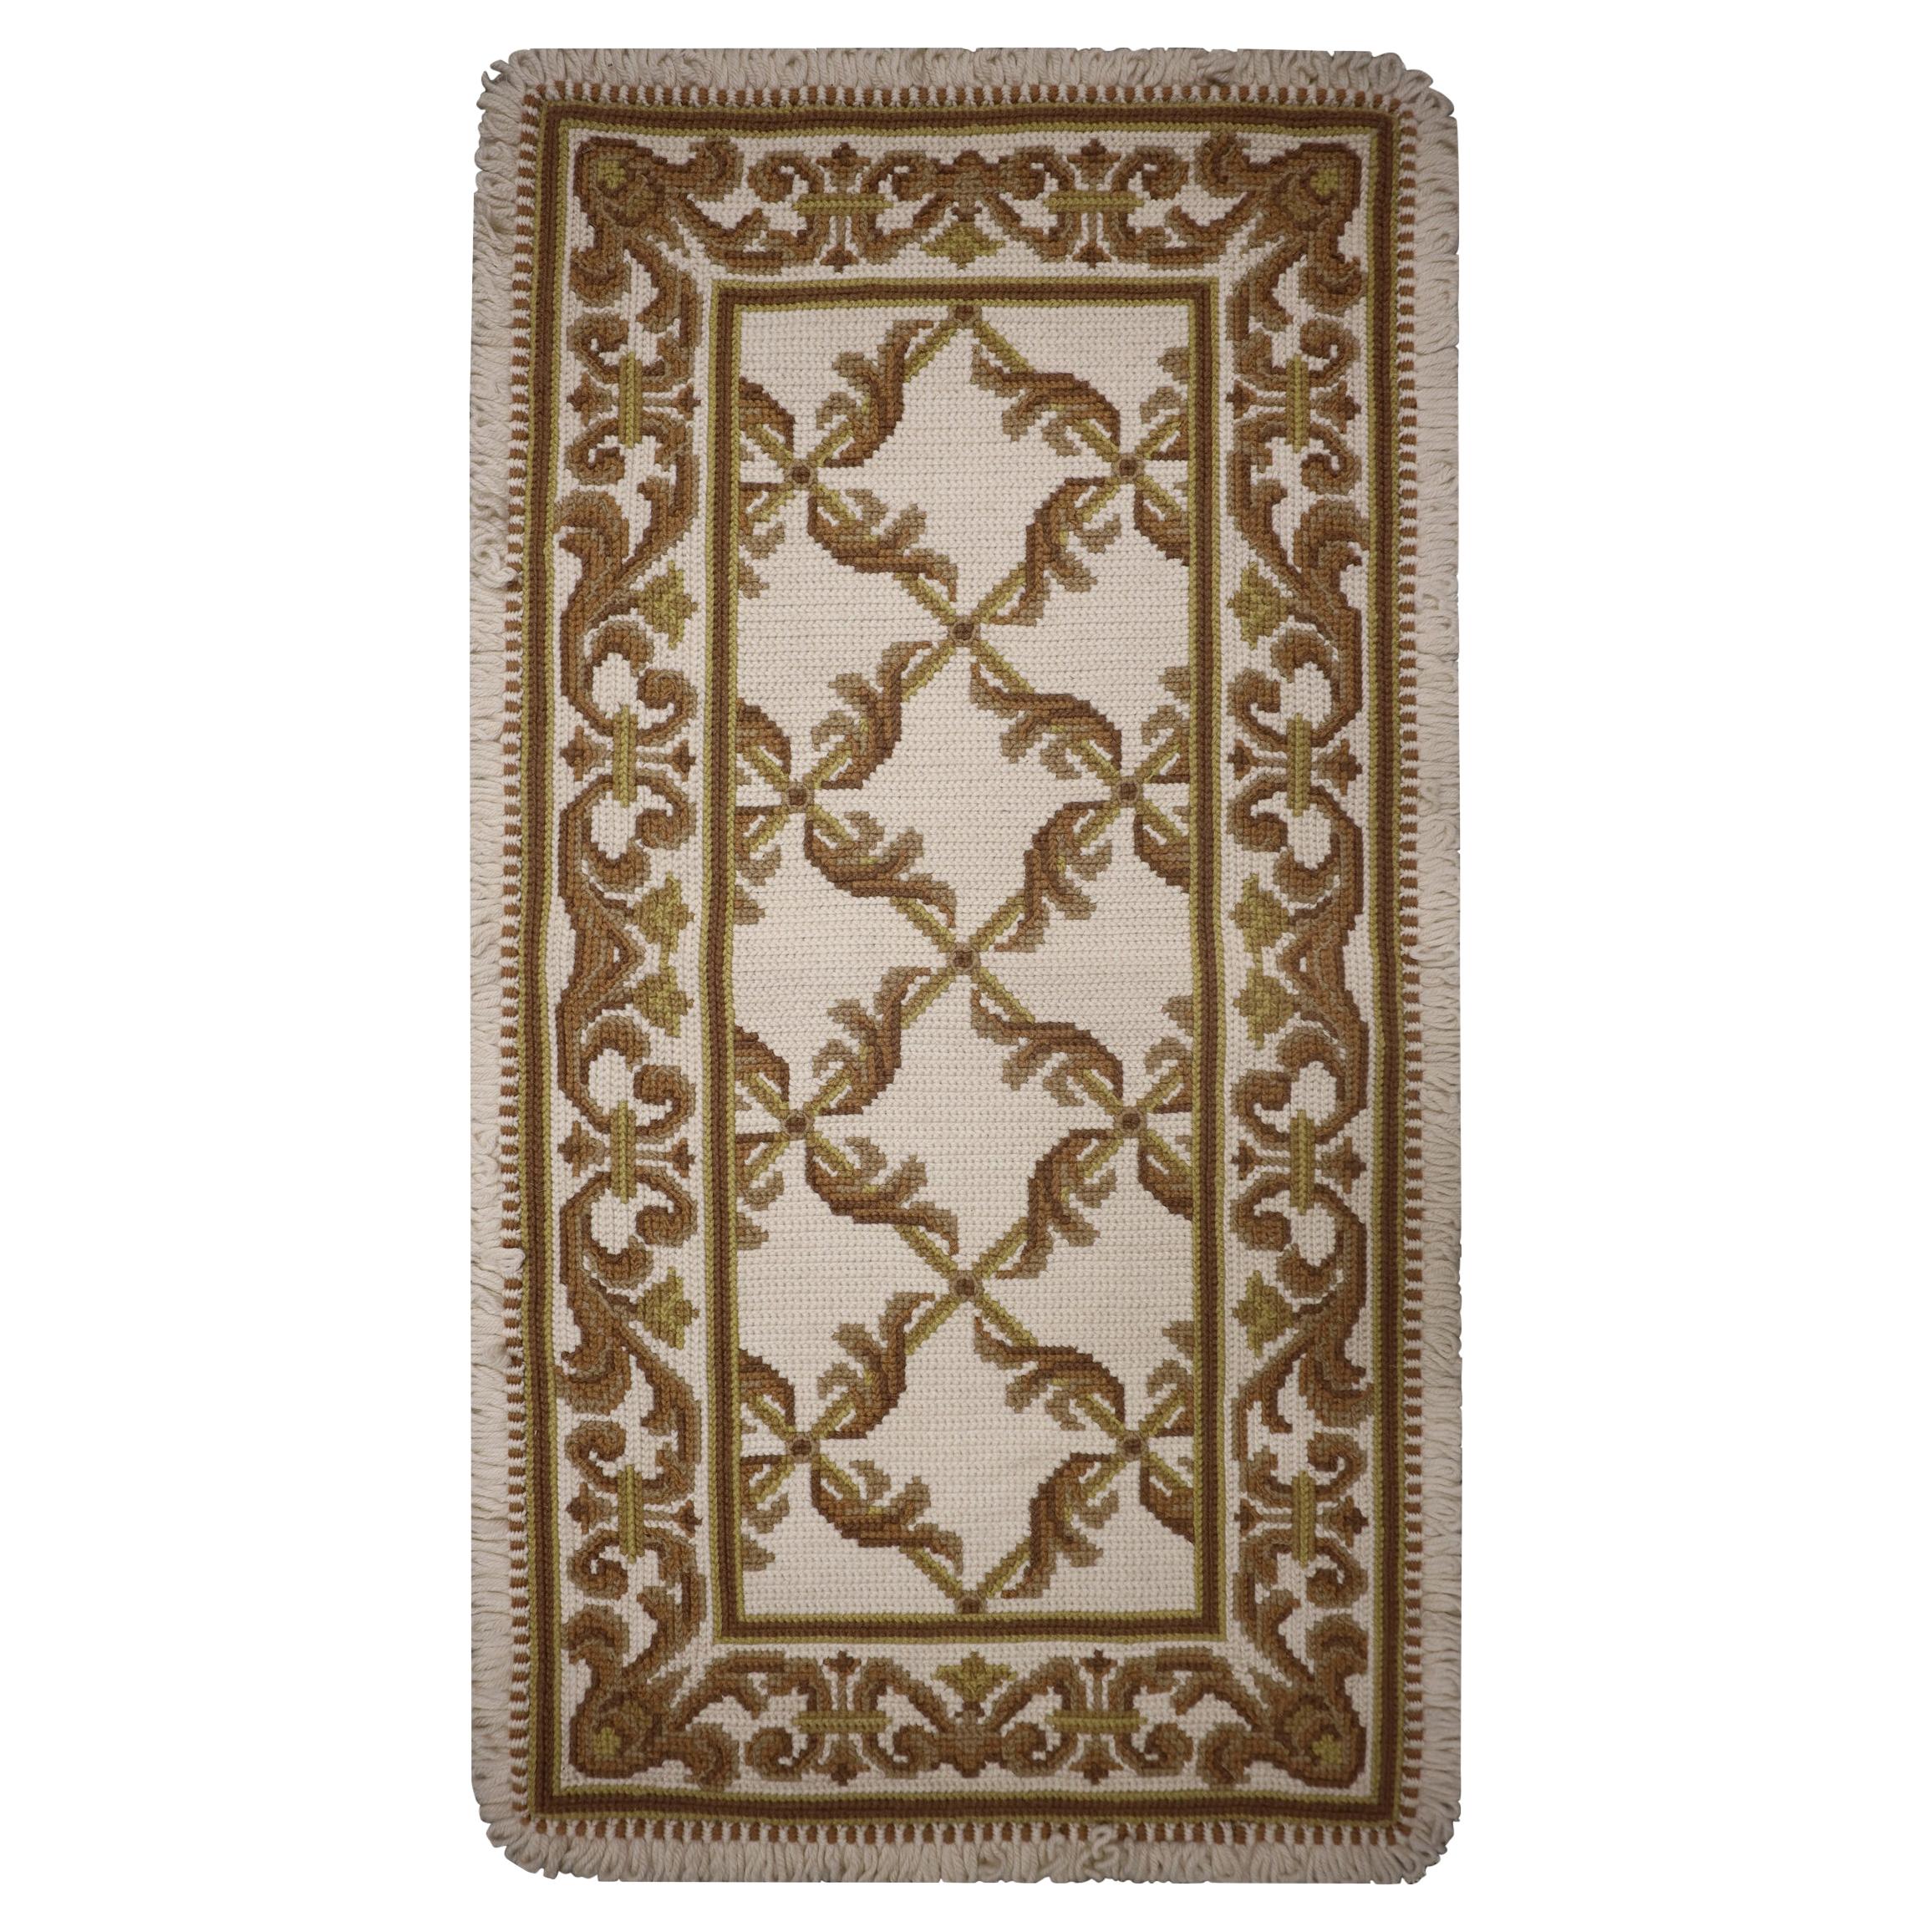 Portuguese Beige Cream Needlepoint Rug Hand Woven Traditional Carpet